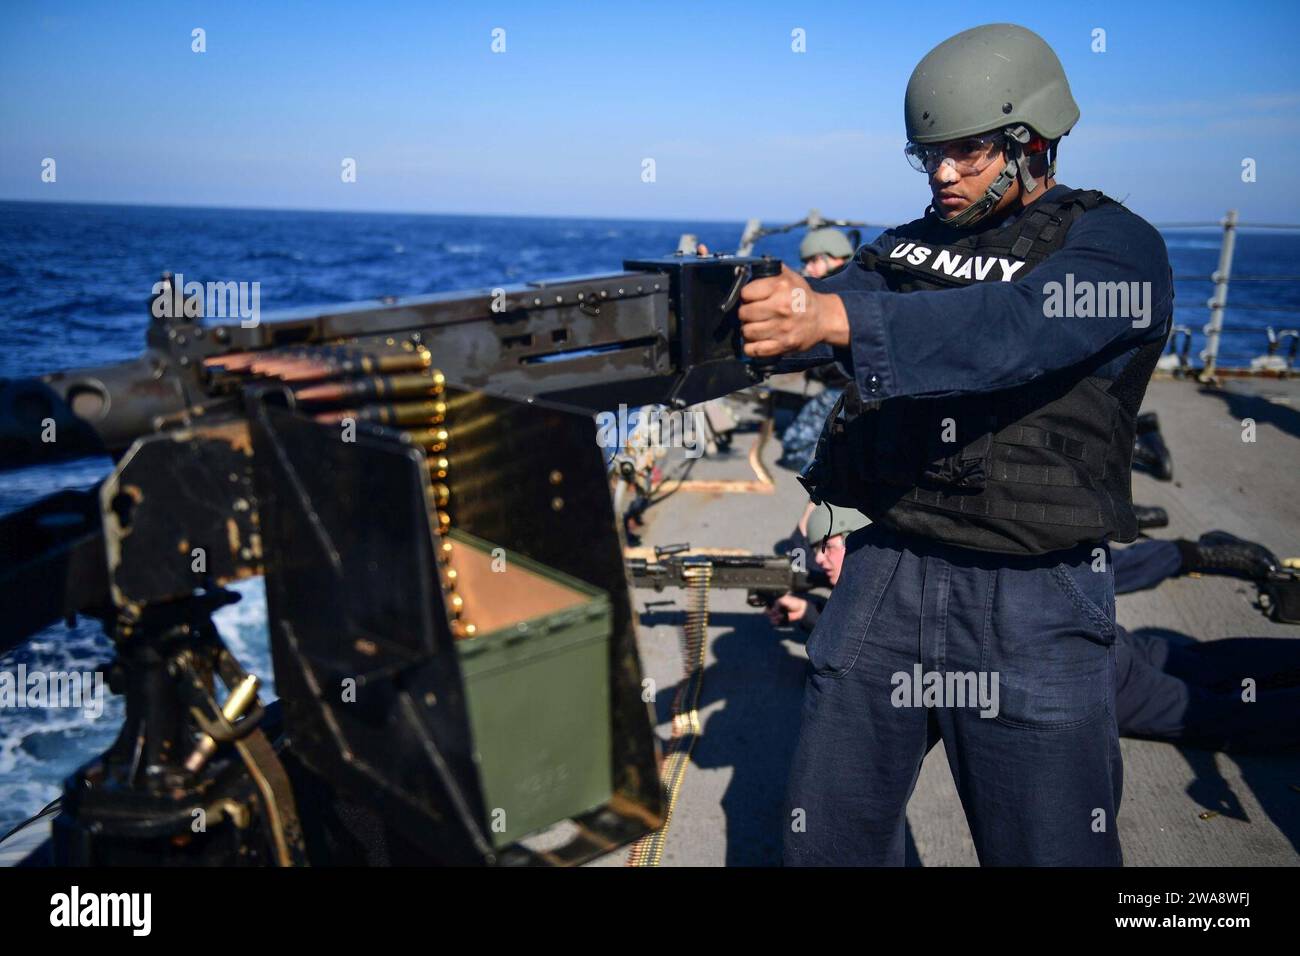 US military forces. 171021GX781-178 MEDITERRANEAN SEA (Oct. 21, 2017) - Sonar Technician (Surface) 3rd Class Ricardo Valdez, from Vallejo, California, fires a .50 caliber machine gun during a live-fire exercise aboard the Arleigh Burke-class guided-missile destroyer USS James E. Williams (DDG 95) Oct. 21, 2017.  James E. Williams, home-ported in Norfolk, is on a routine deployment to the U.S. 6th Fleet area of operations in support of U.S. national security interests in Europe. (U.S. Navy photo by Mass Communication Specialist 3rd Class Colbey Livingston/ Released) Stock Photo